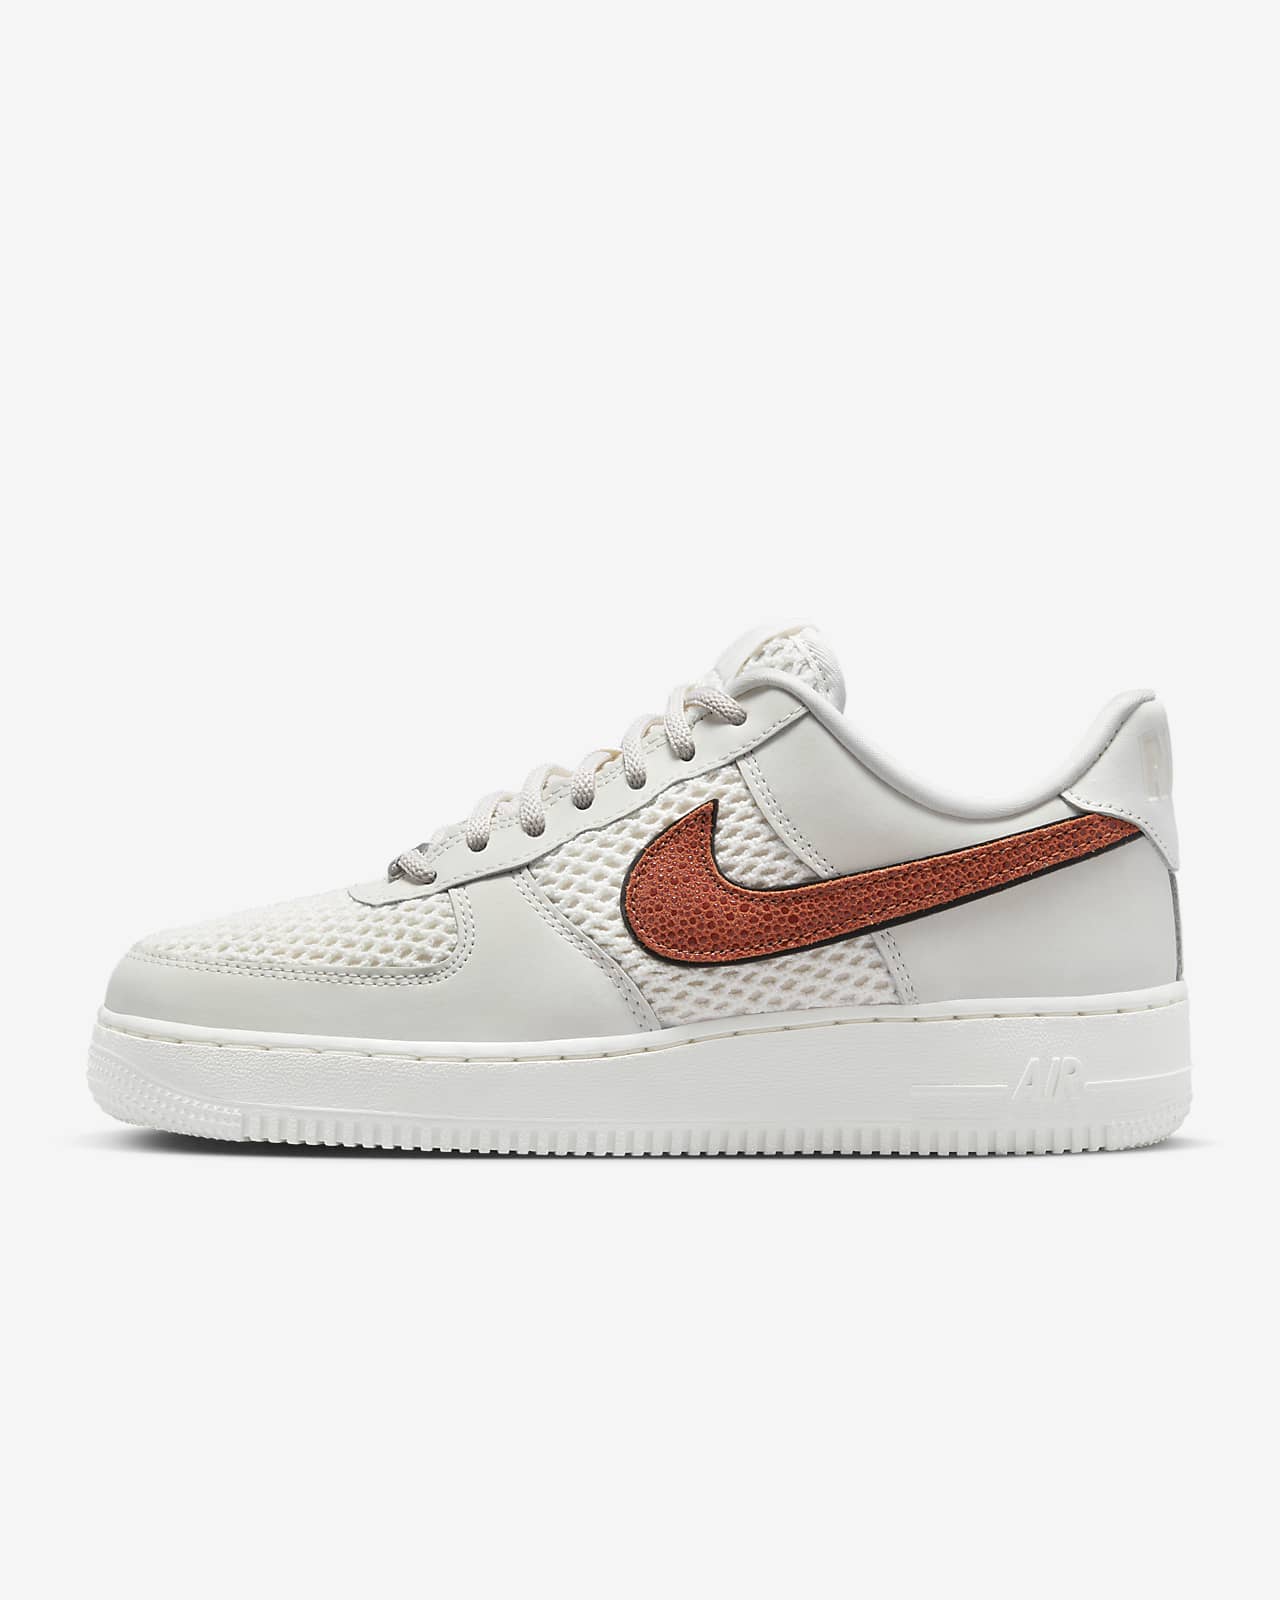 Nike Air Force 1 ’07 Women's Shoes